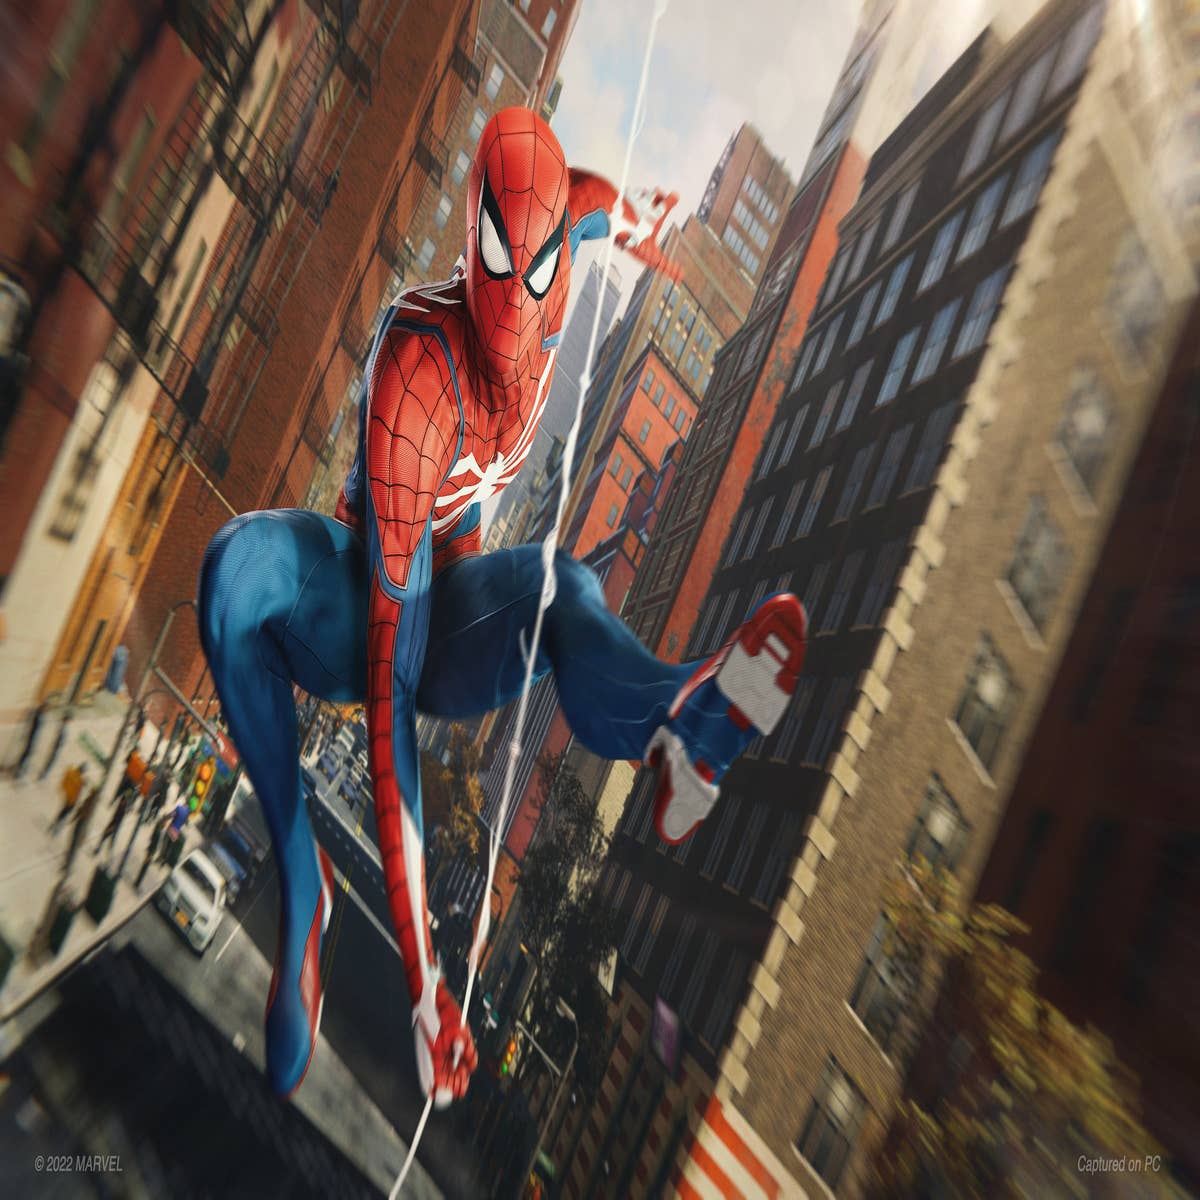 Spider-Man Remastered can now be bought as a standalone PS5 game